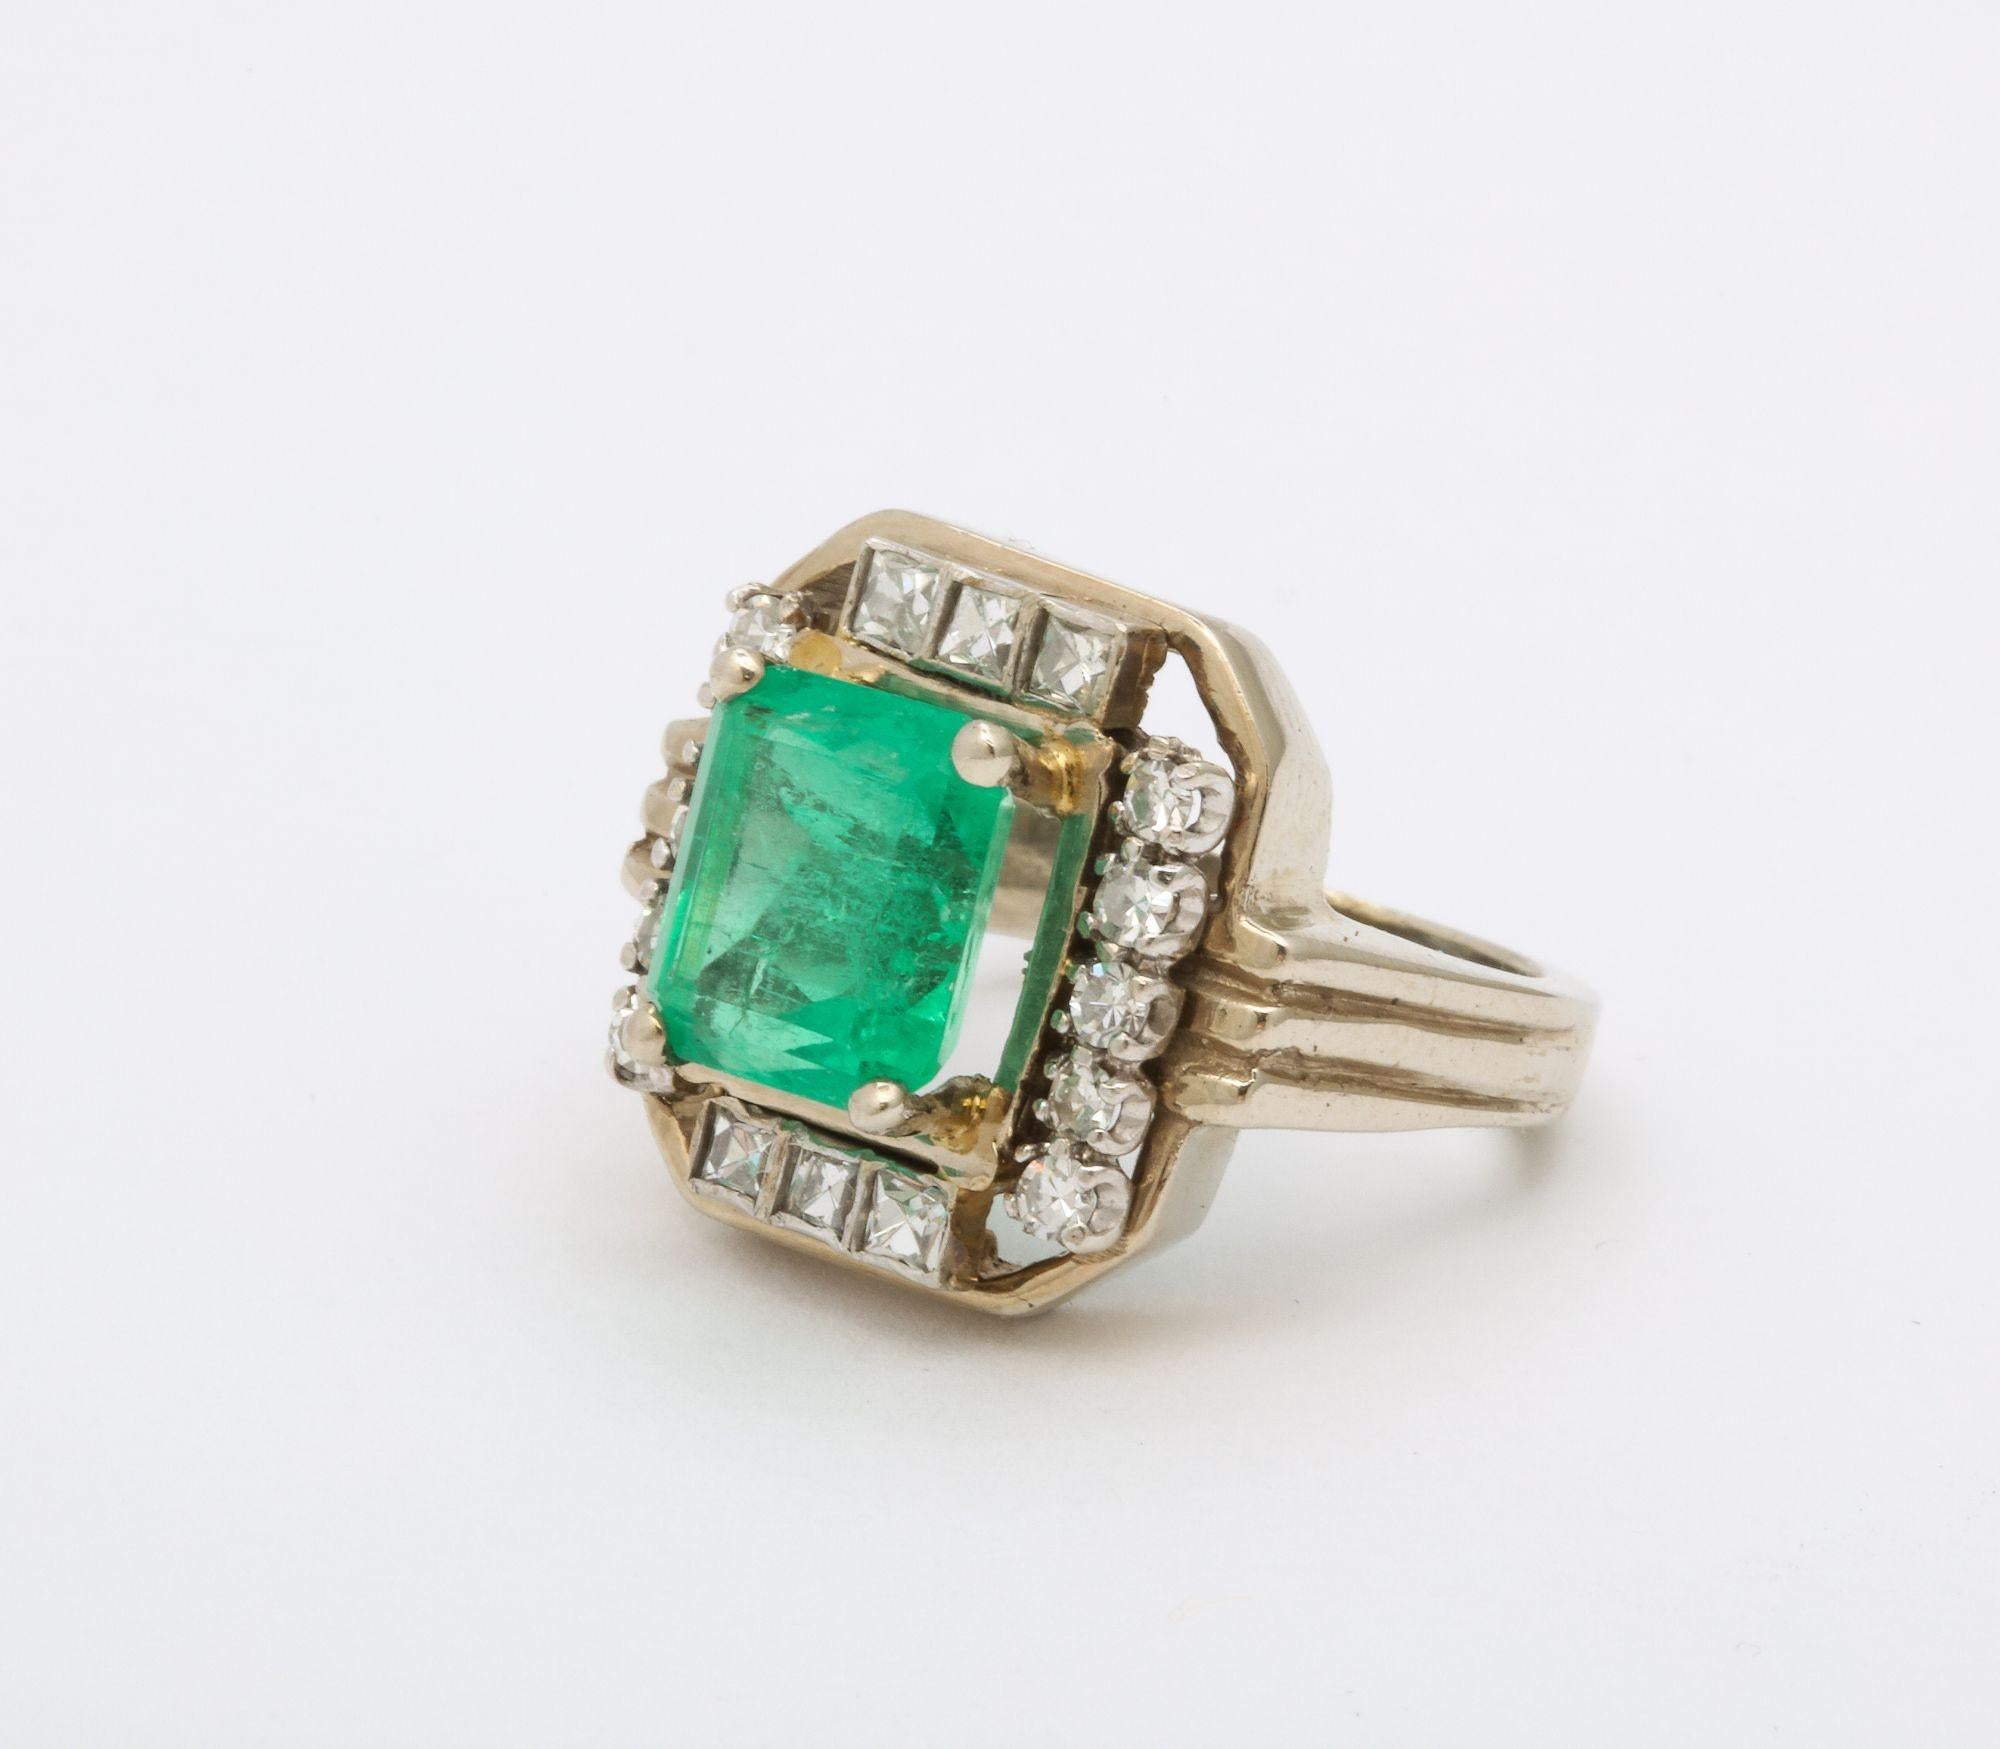 A beautiful Art Deco Square Cut Emerald Ring approximately 2.5 ct surrounded by square cut and round diamonds. 